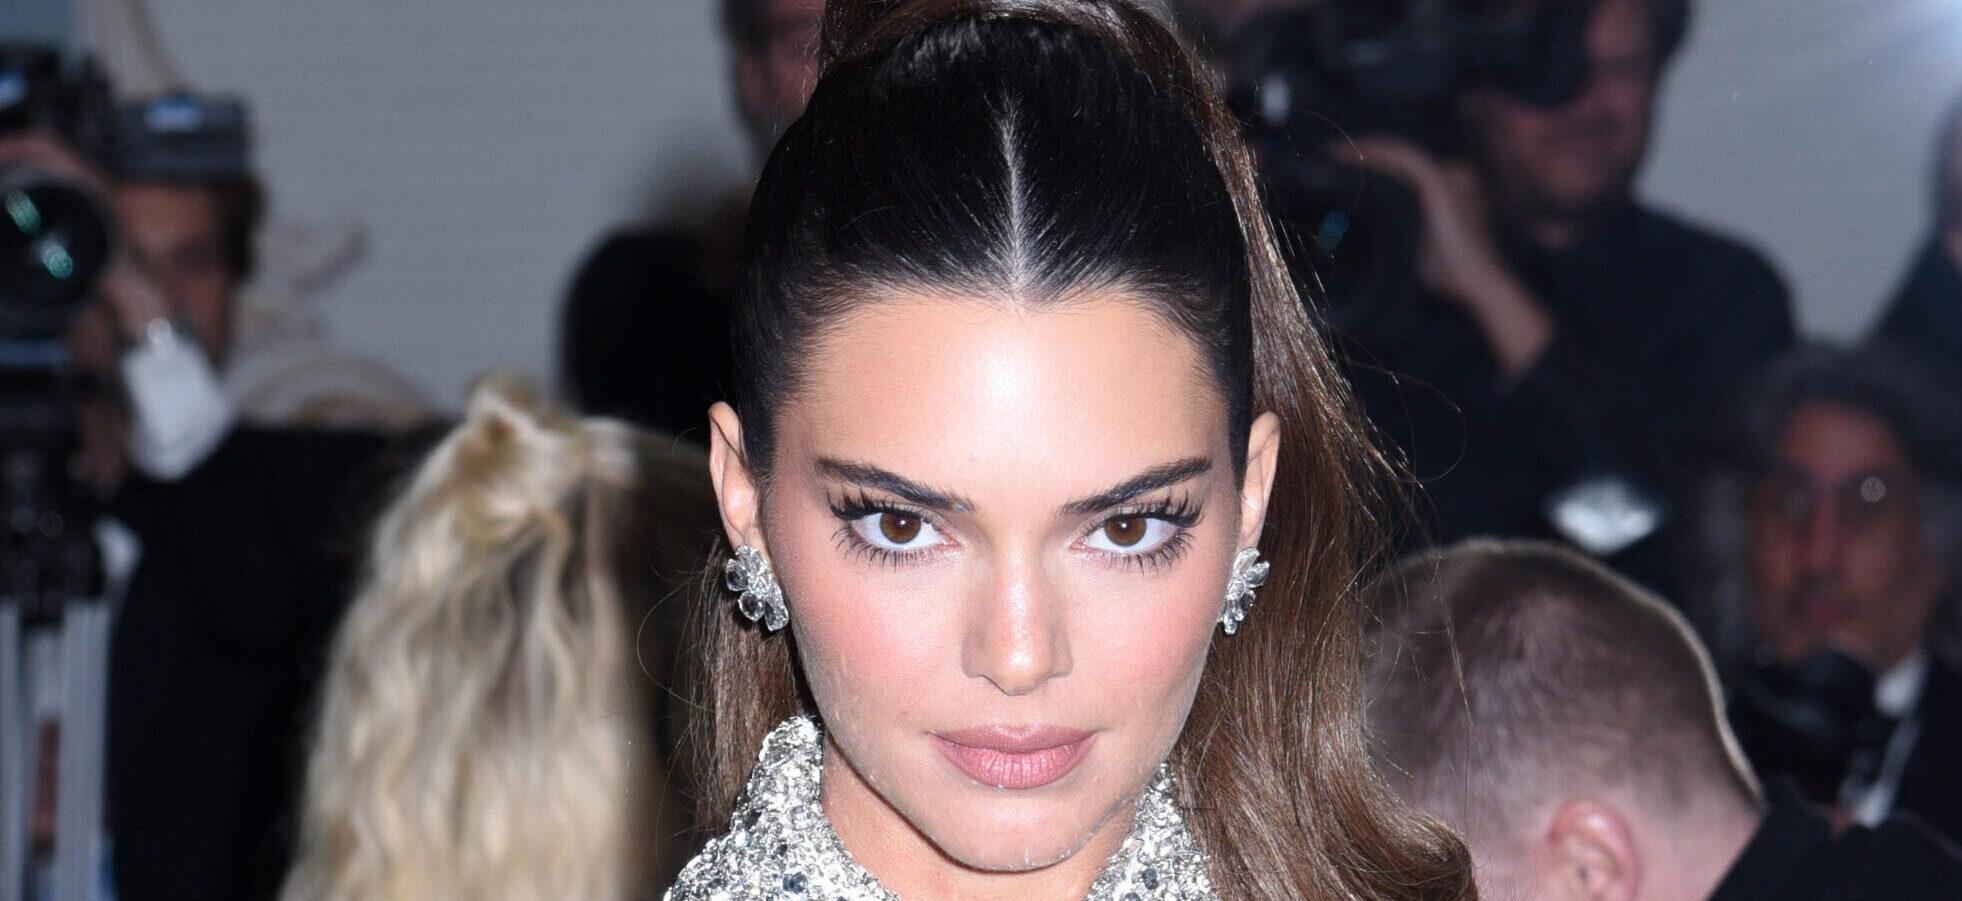 Kendall Jenner Busted For Speeding Over 65 MPH In Los Angeles By CHP